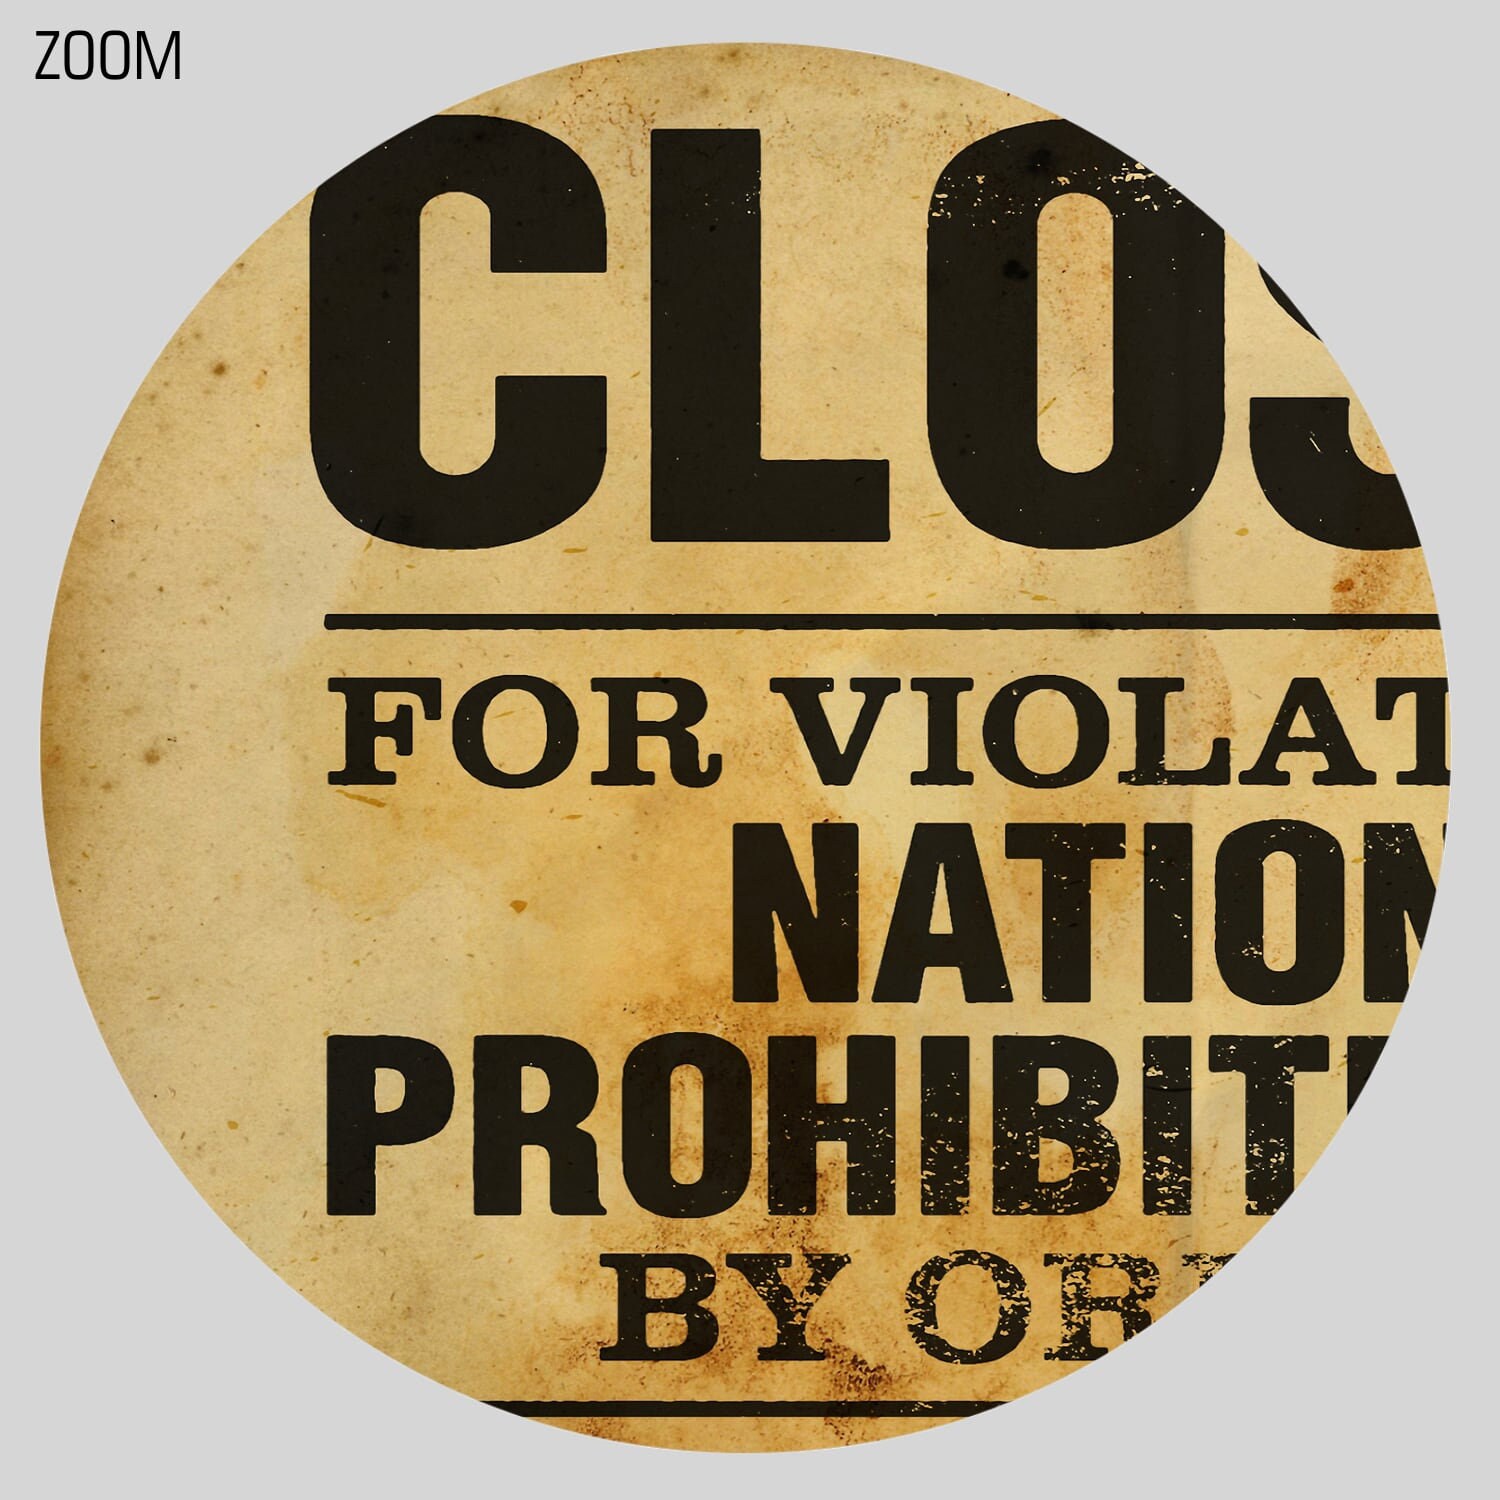 NPA National Prohibition Act Closed for Violation Volstead Act 18th  Amendment Vintage Style Sign Cool Wall Decor Art Print Poster 24x36